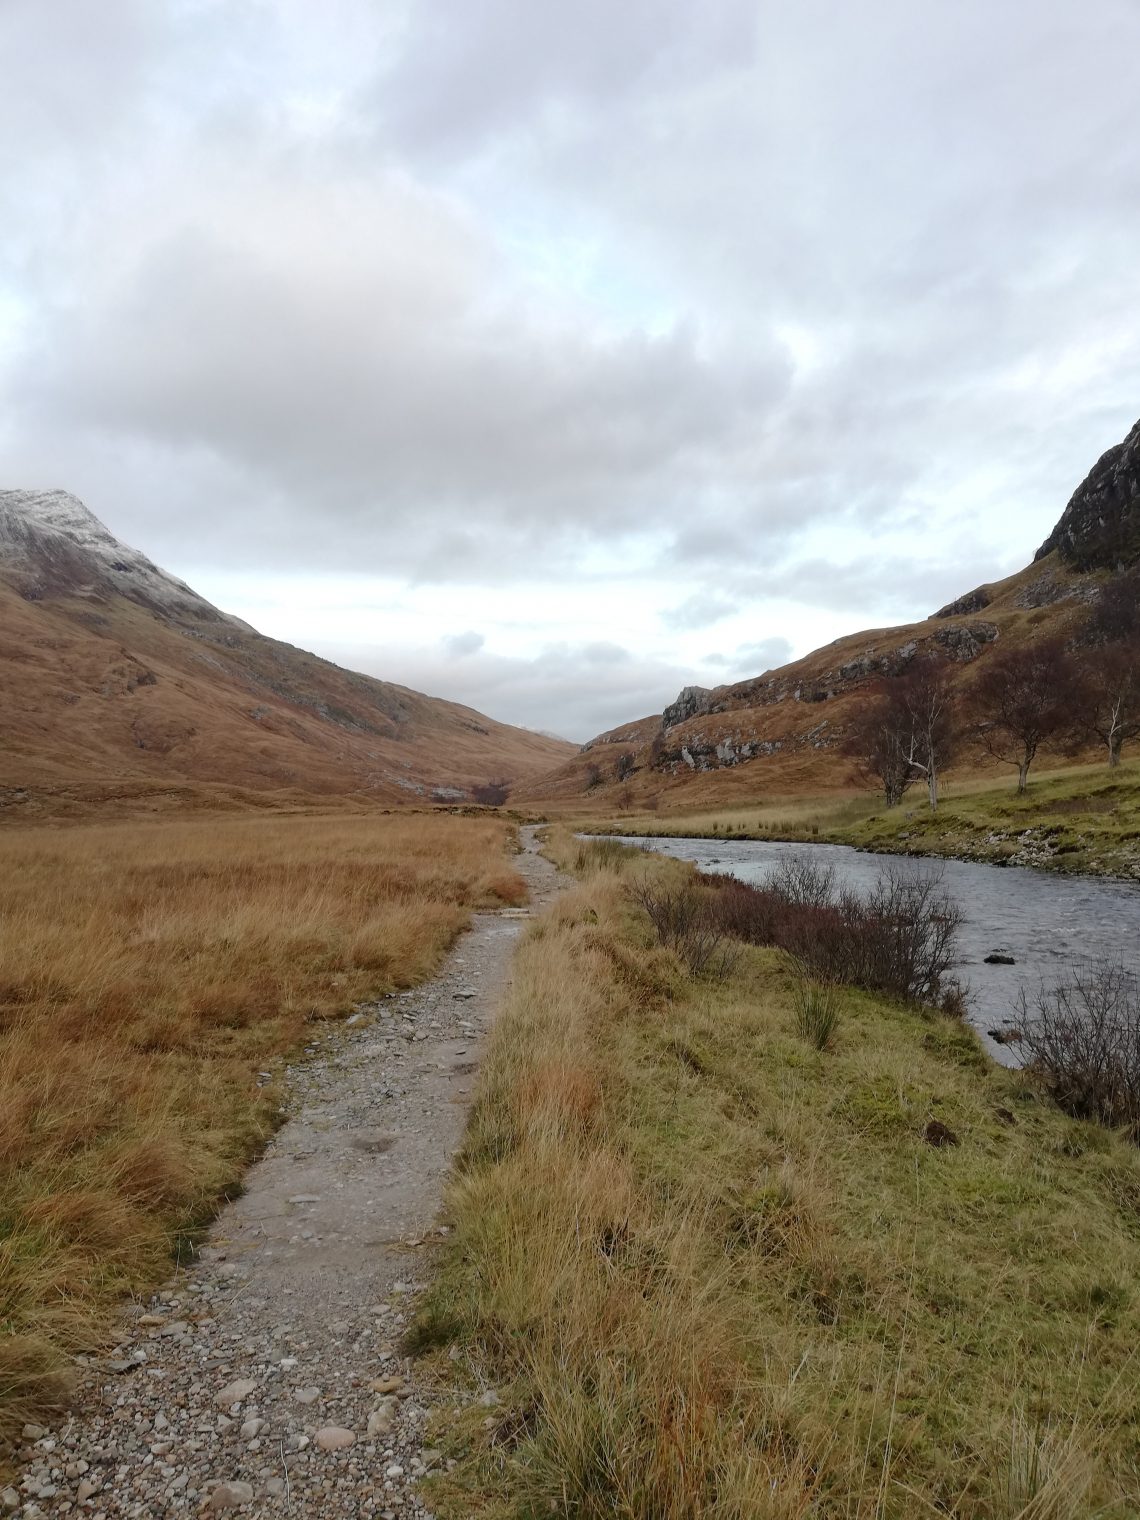 Navigation practice in Glen Nevis with the footpath running along the river down the glen framed by hillsides on both sides.